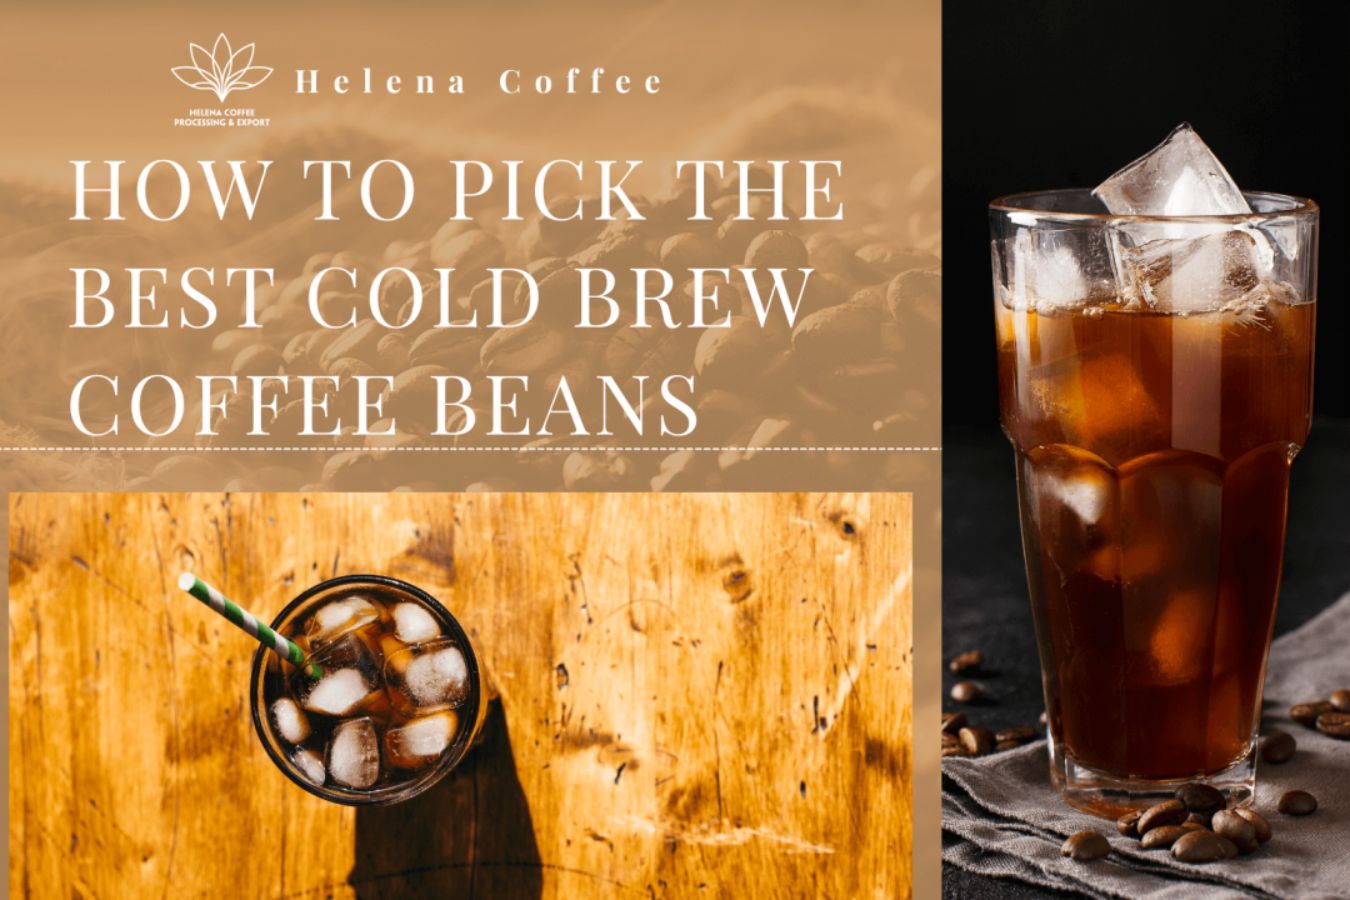 How To Pick The Best Cold Brew Coffee Beans